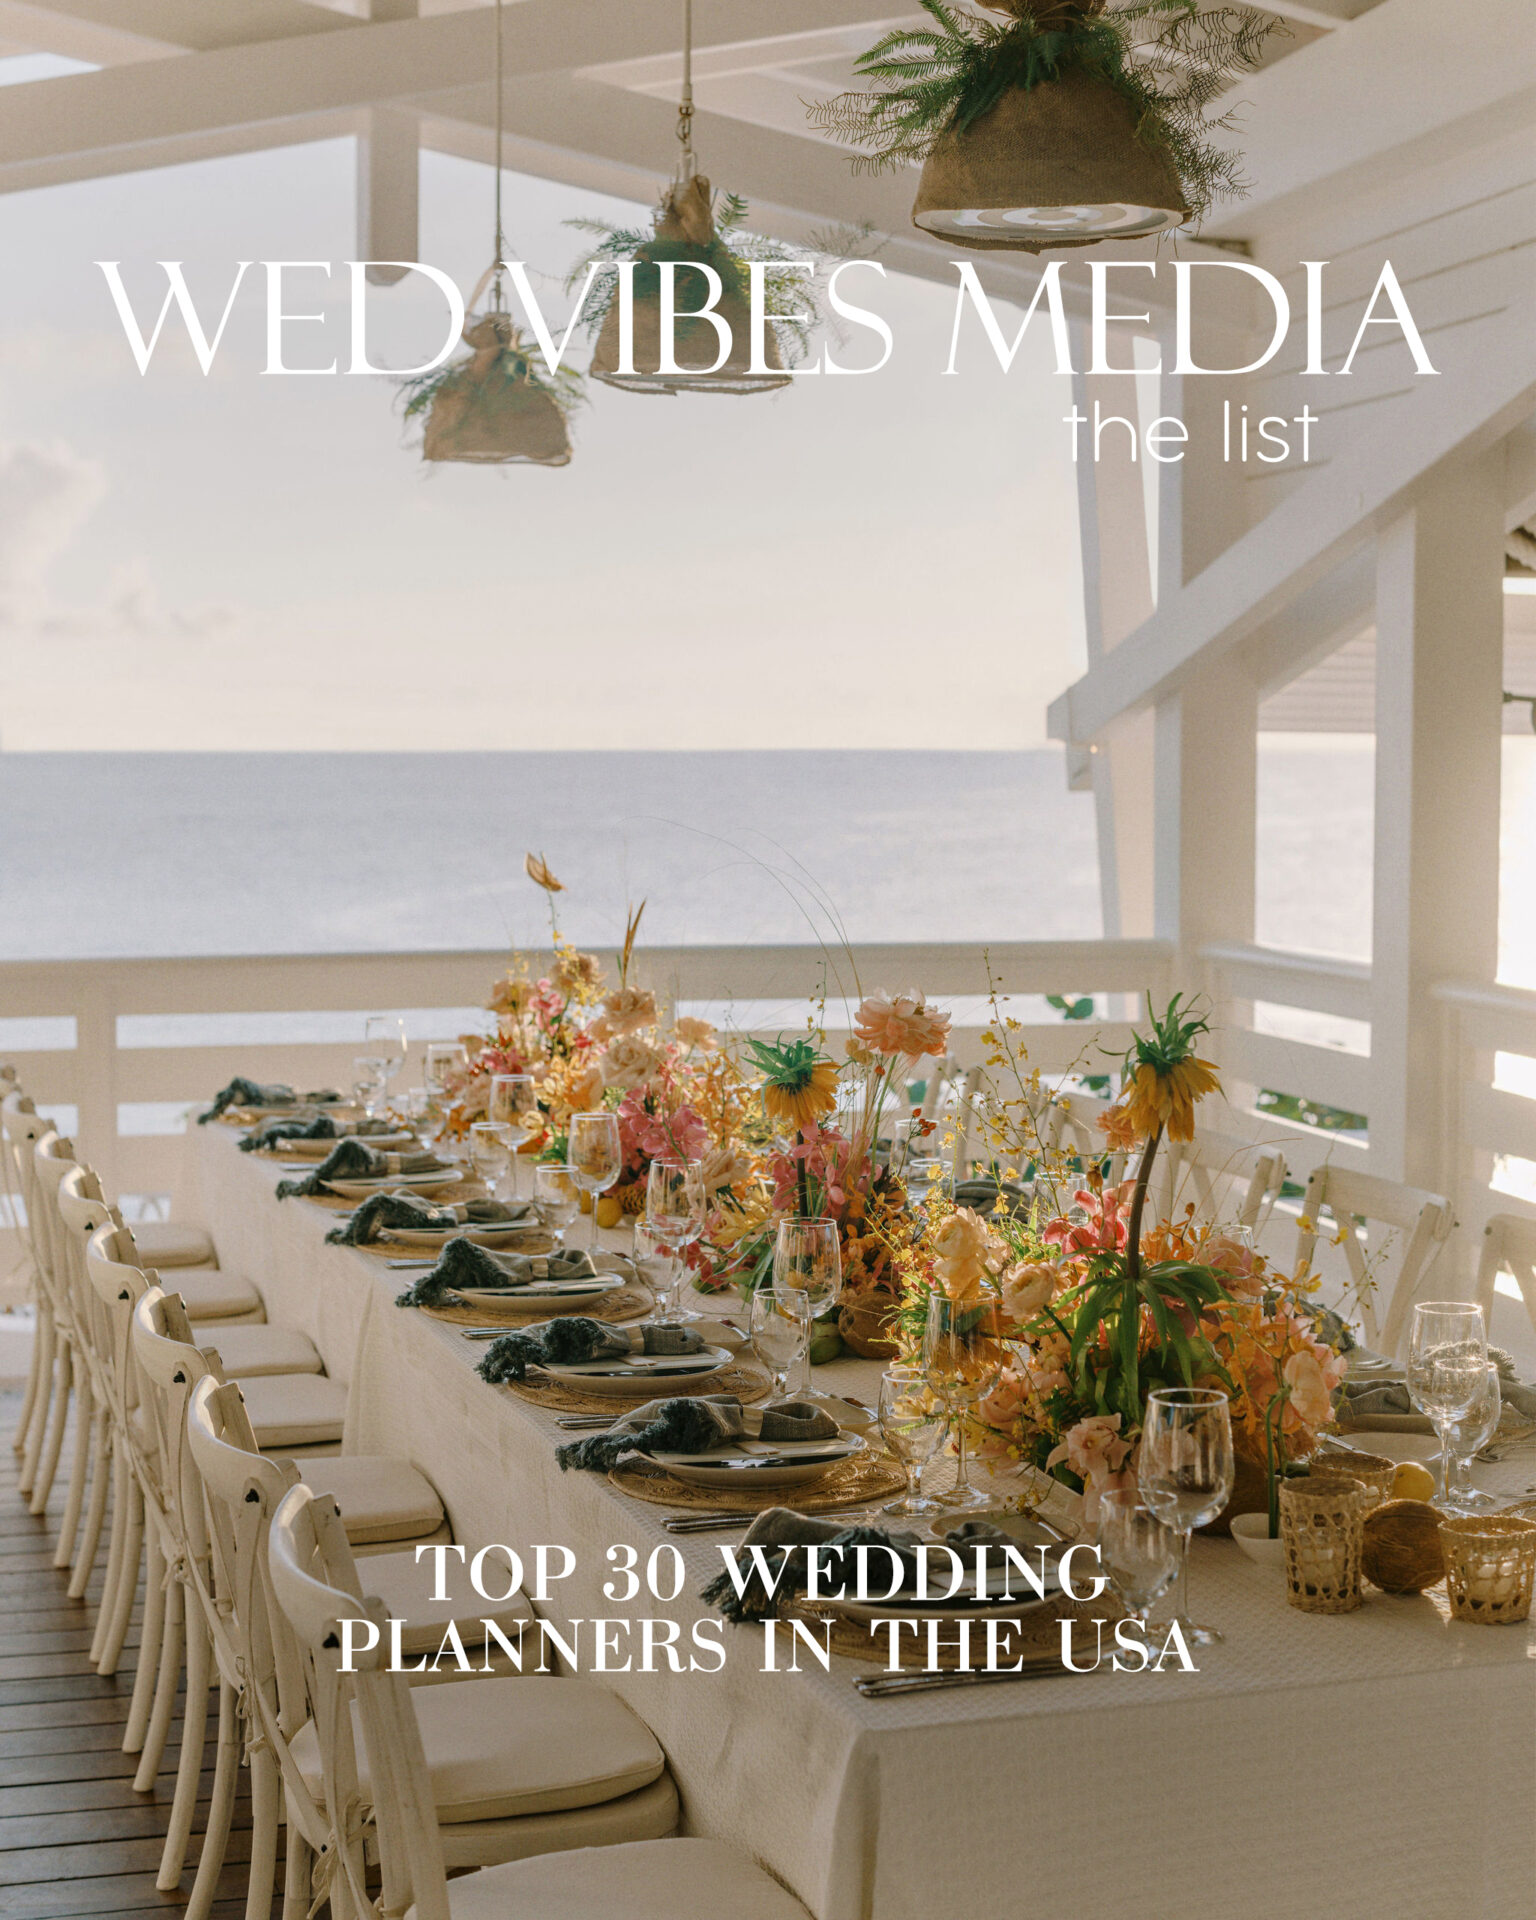 HauteFêtes named Top 30 Wedding Planners in the USA by WedVibes